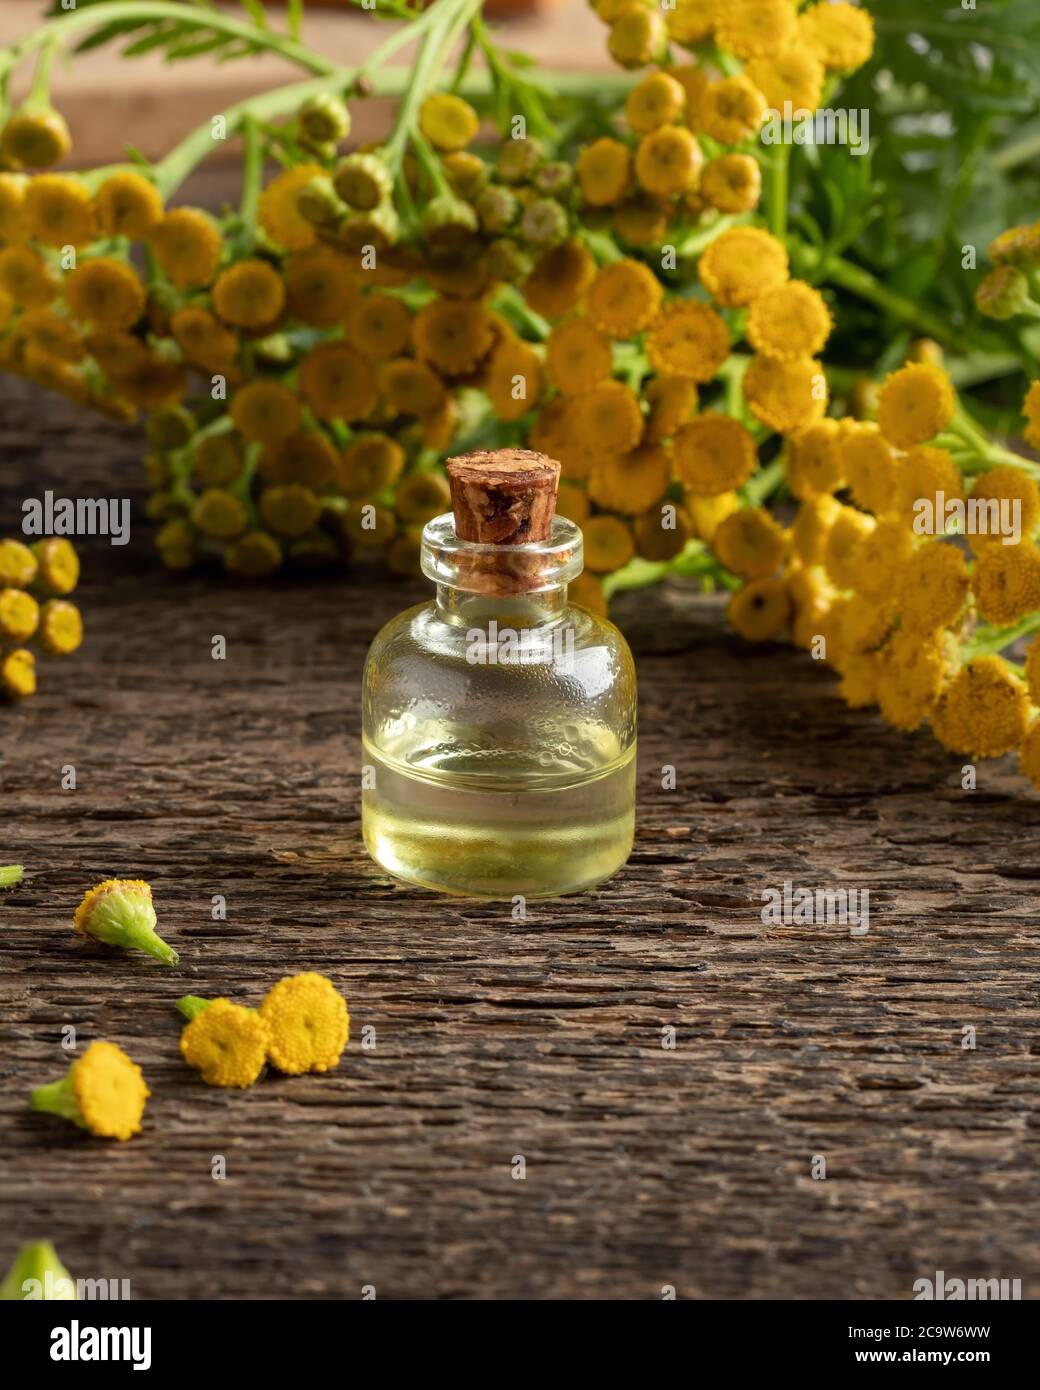 A bottle of essential oil with fresh blooming common tansy, or Tanacetum vulgare plant Stock Photo